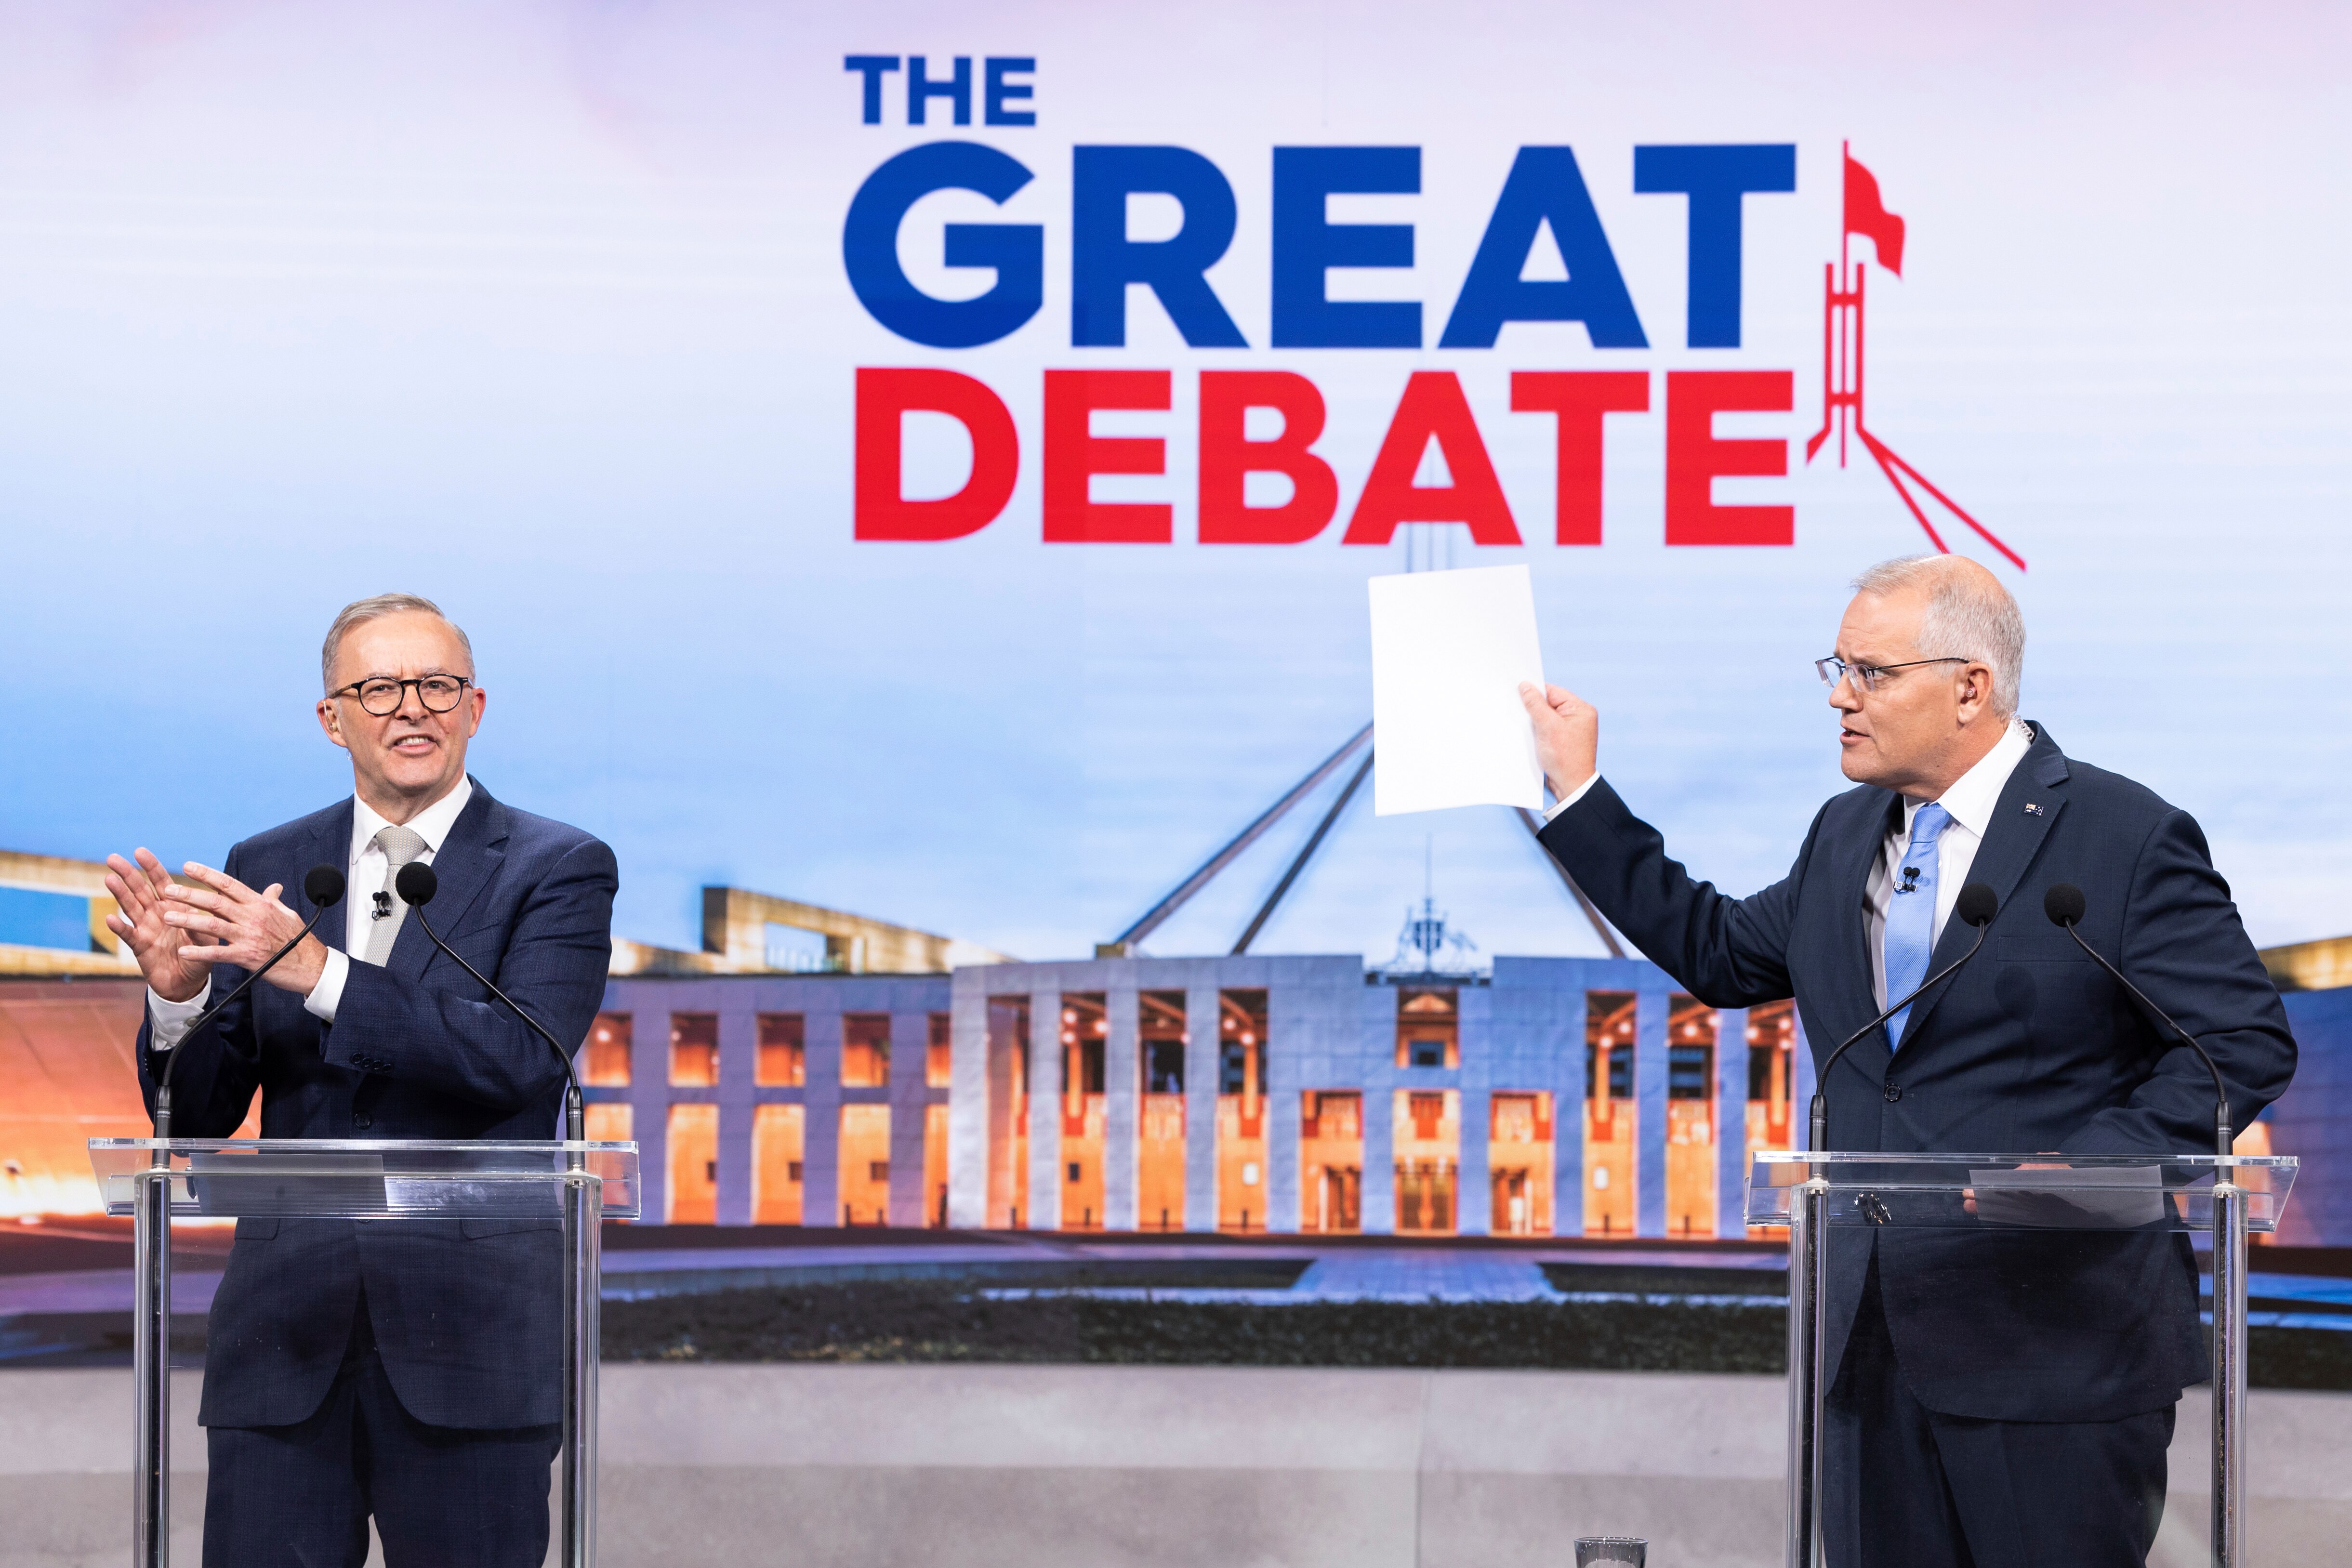 Scott Morrison holds up a piece of white paper as he stands next to Anthony Albanese with 'The Great Debate' sign behind them